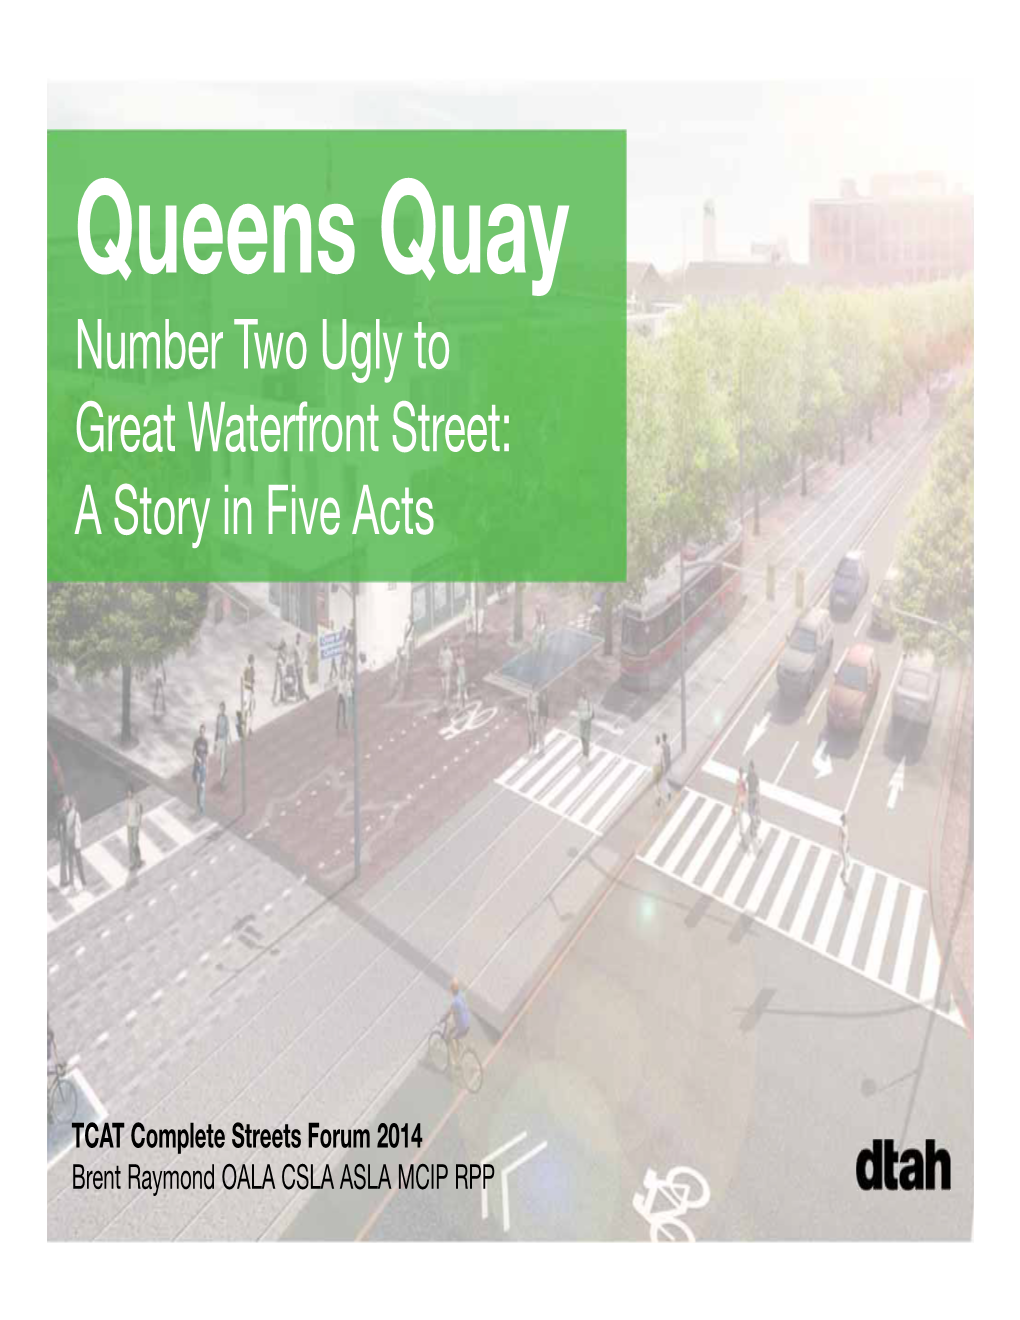 Queens Quay Number Two Ugly to Great Waterfront Street: a Story in Five Acts